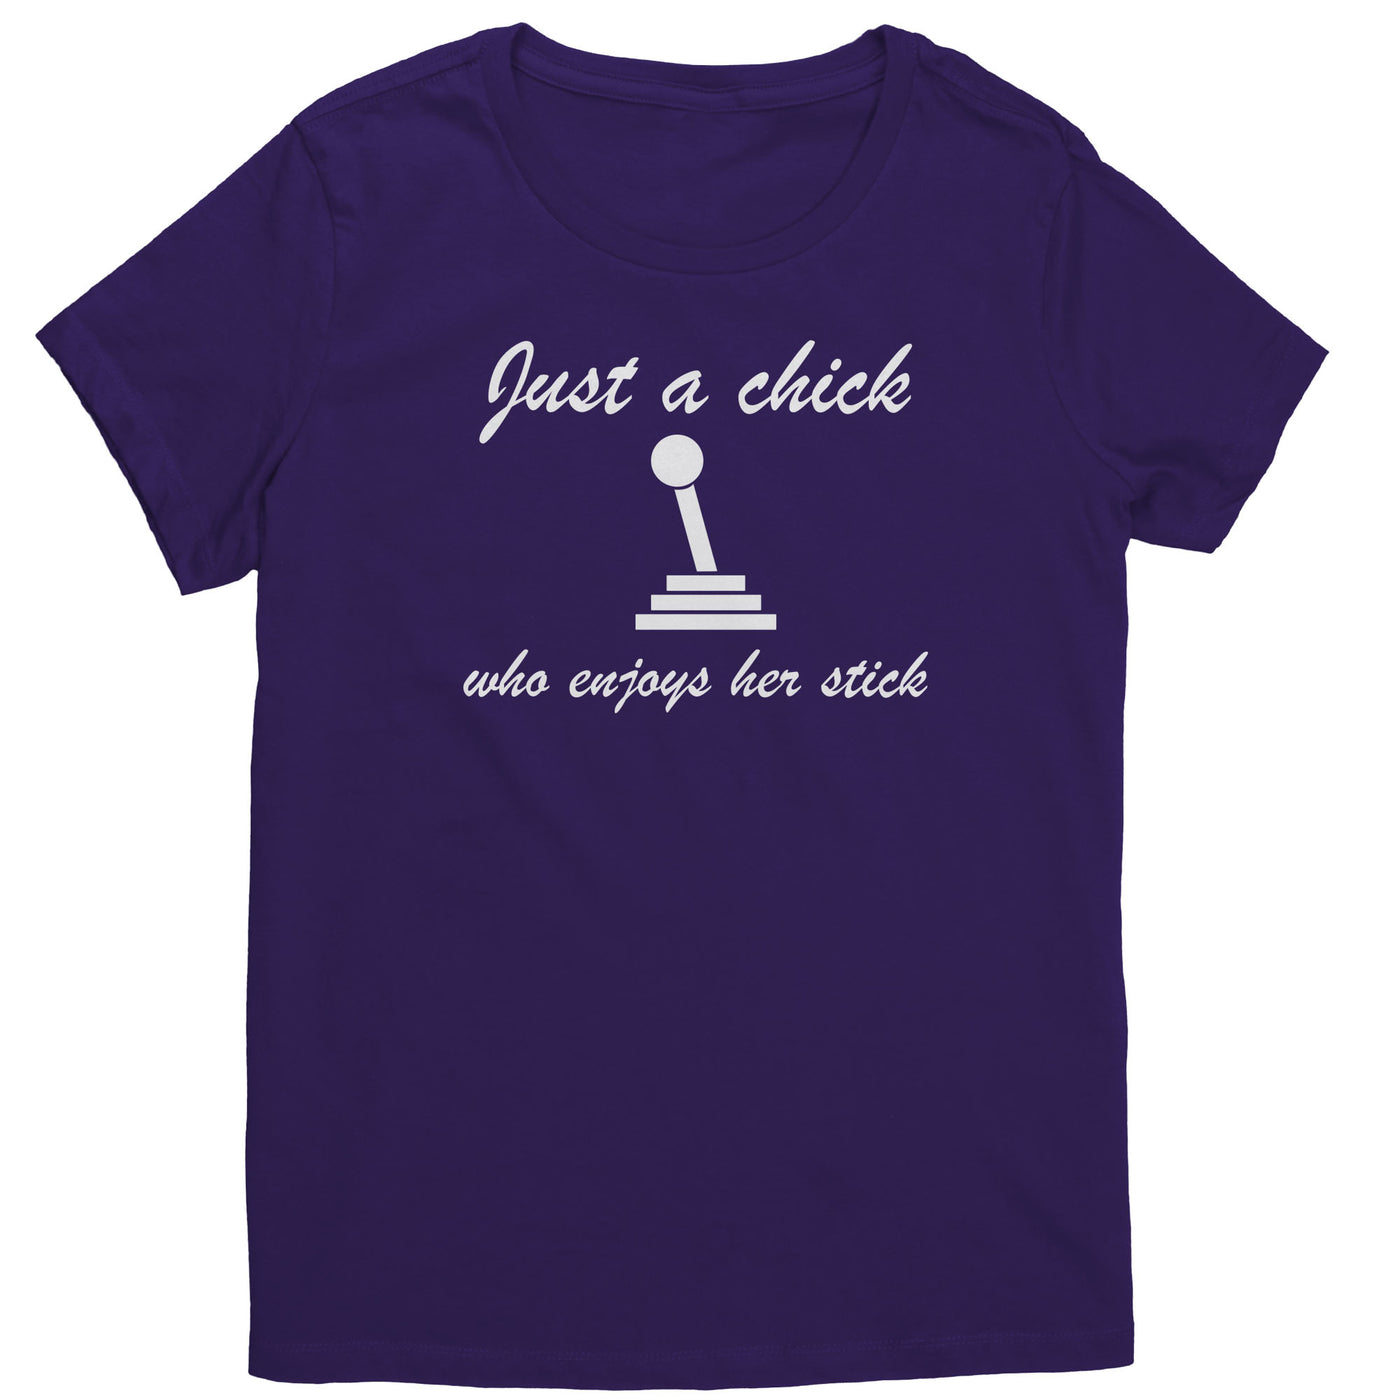 just-a-chick-who-enjoys-her-stick-shirt-purple